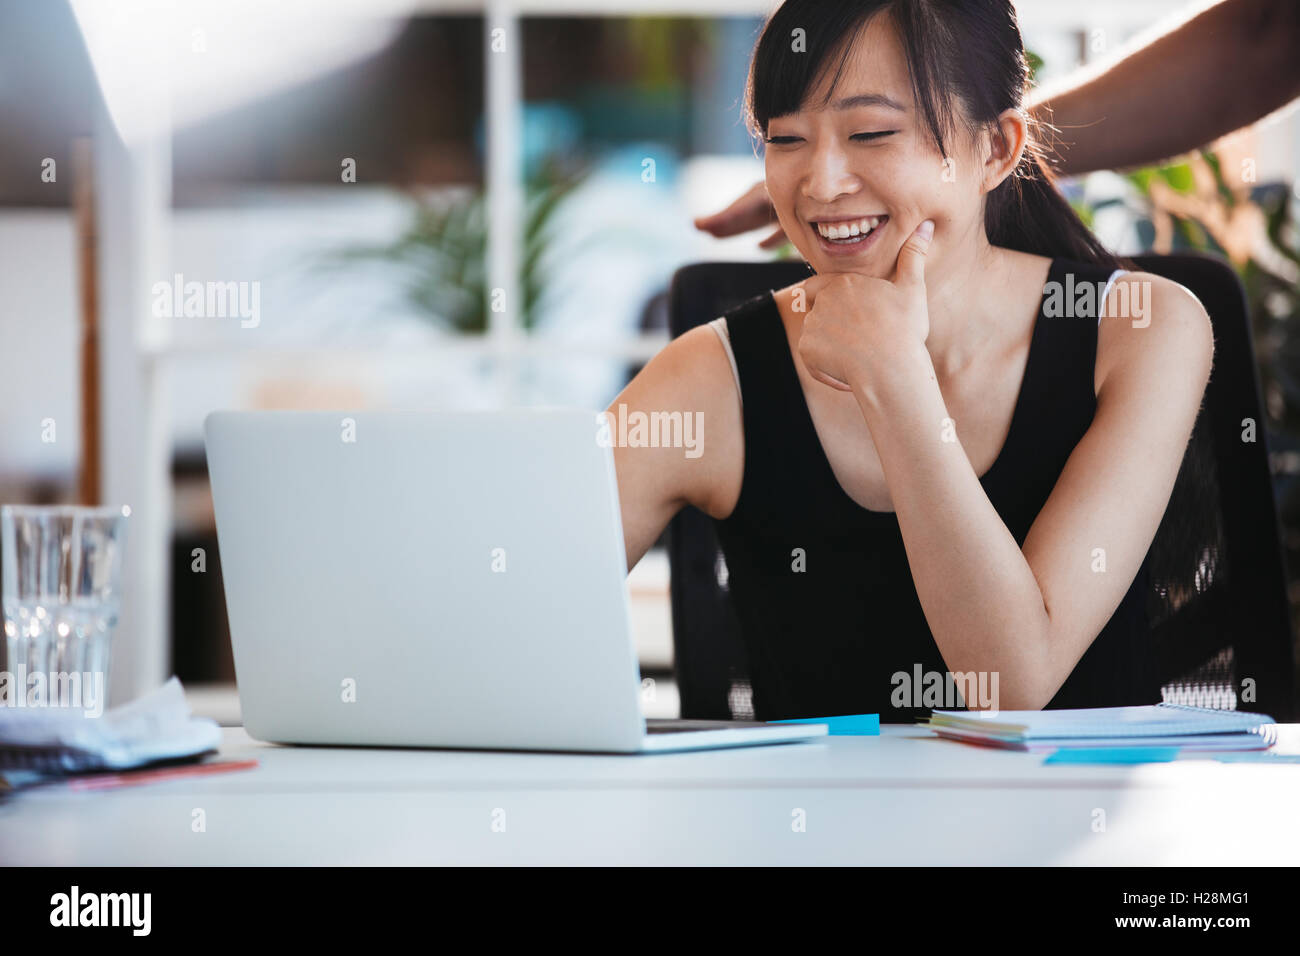 Shot of young smiling woman sitting at her desk and working on laptop. Asian female executive using laptop computer. Stock Photo